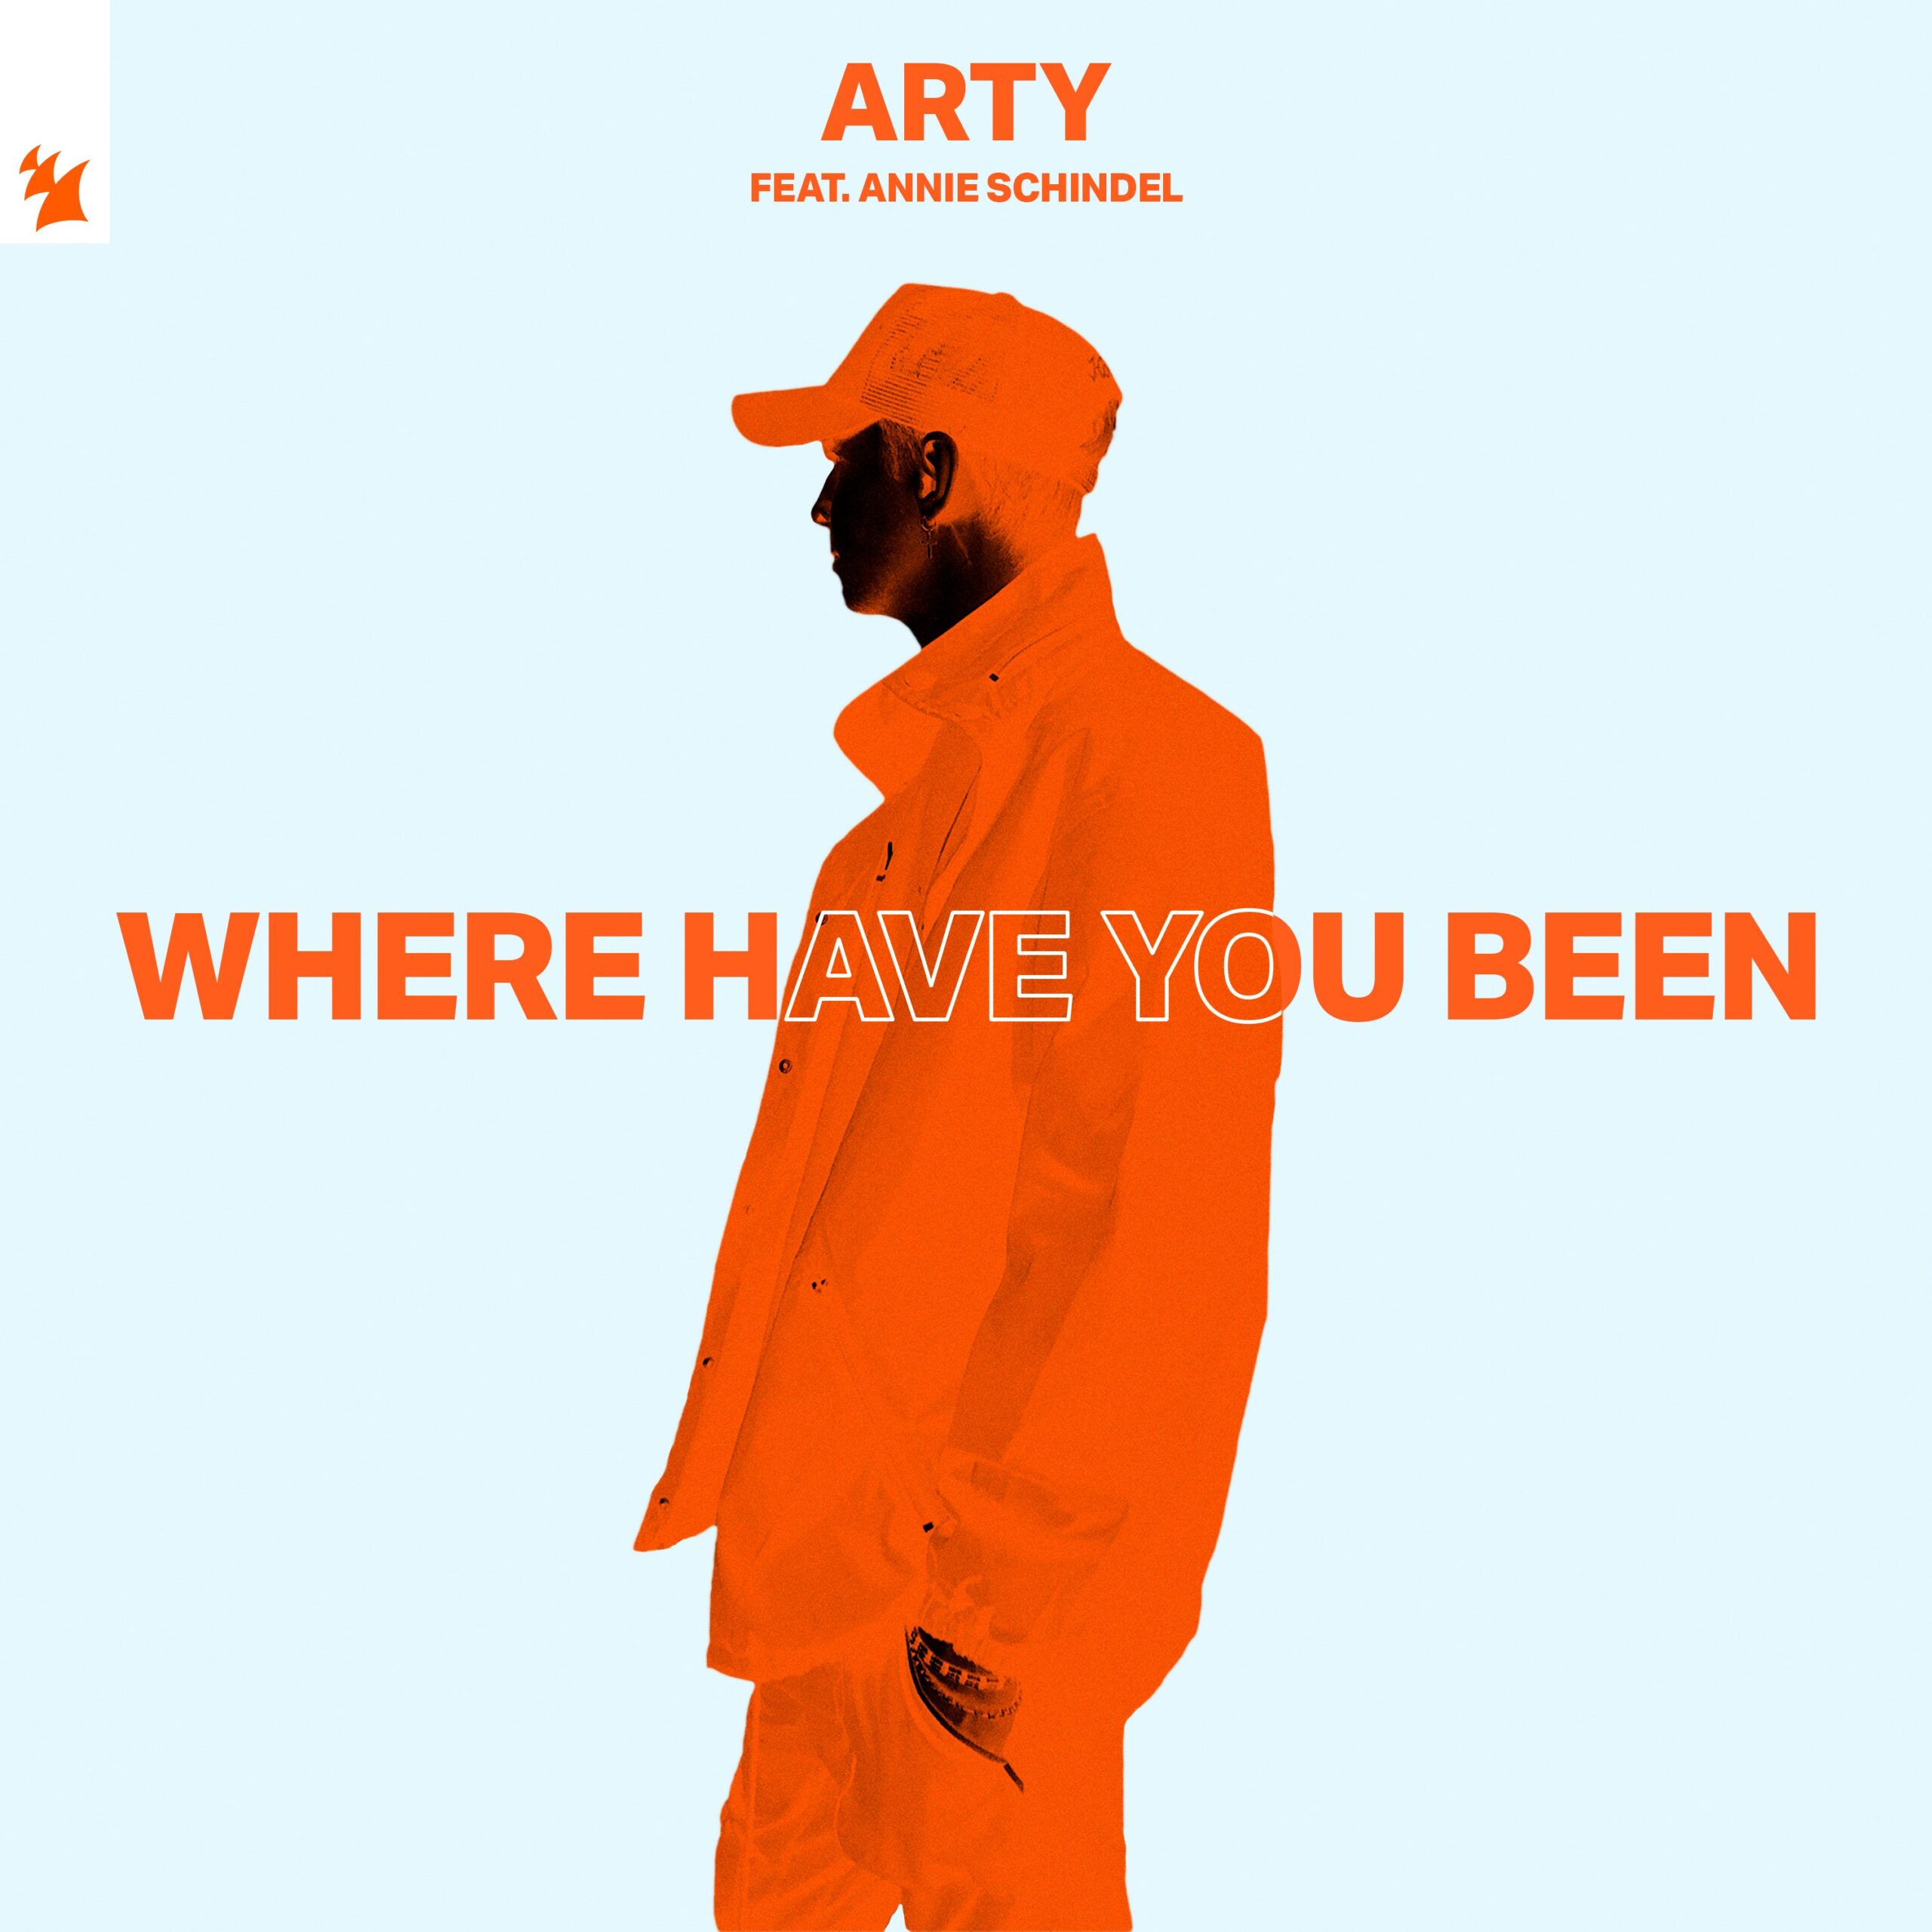 ARTY feat. Annie Schindel presents Where Have You Been on Armada Music